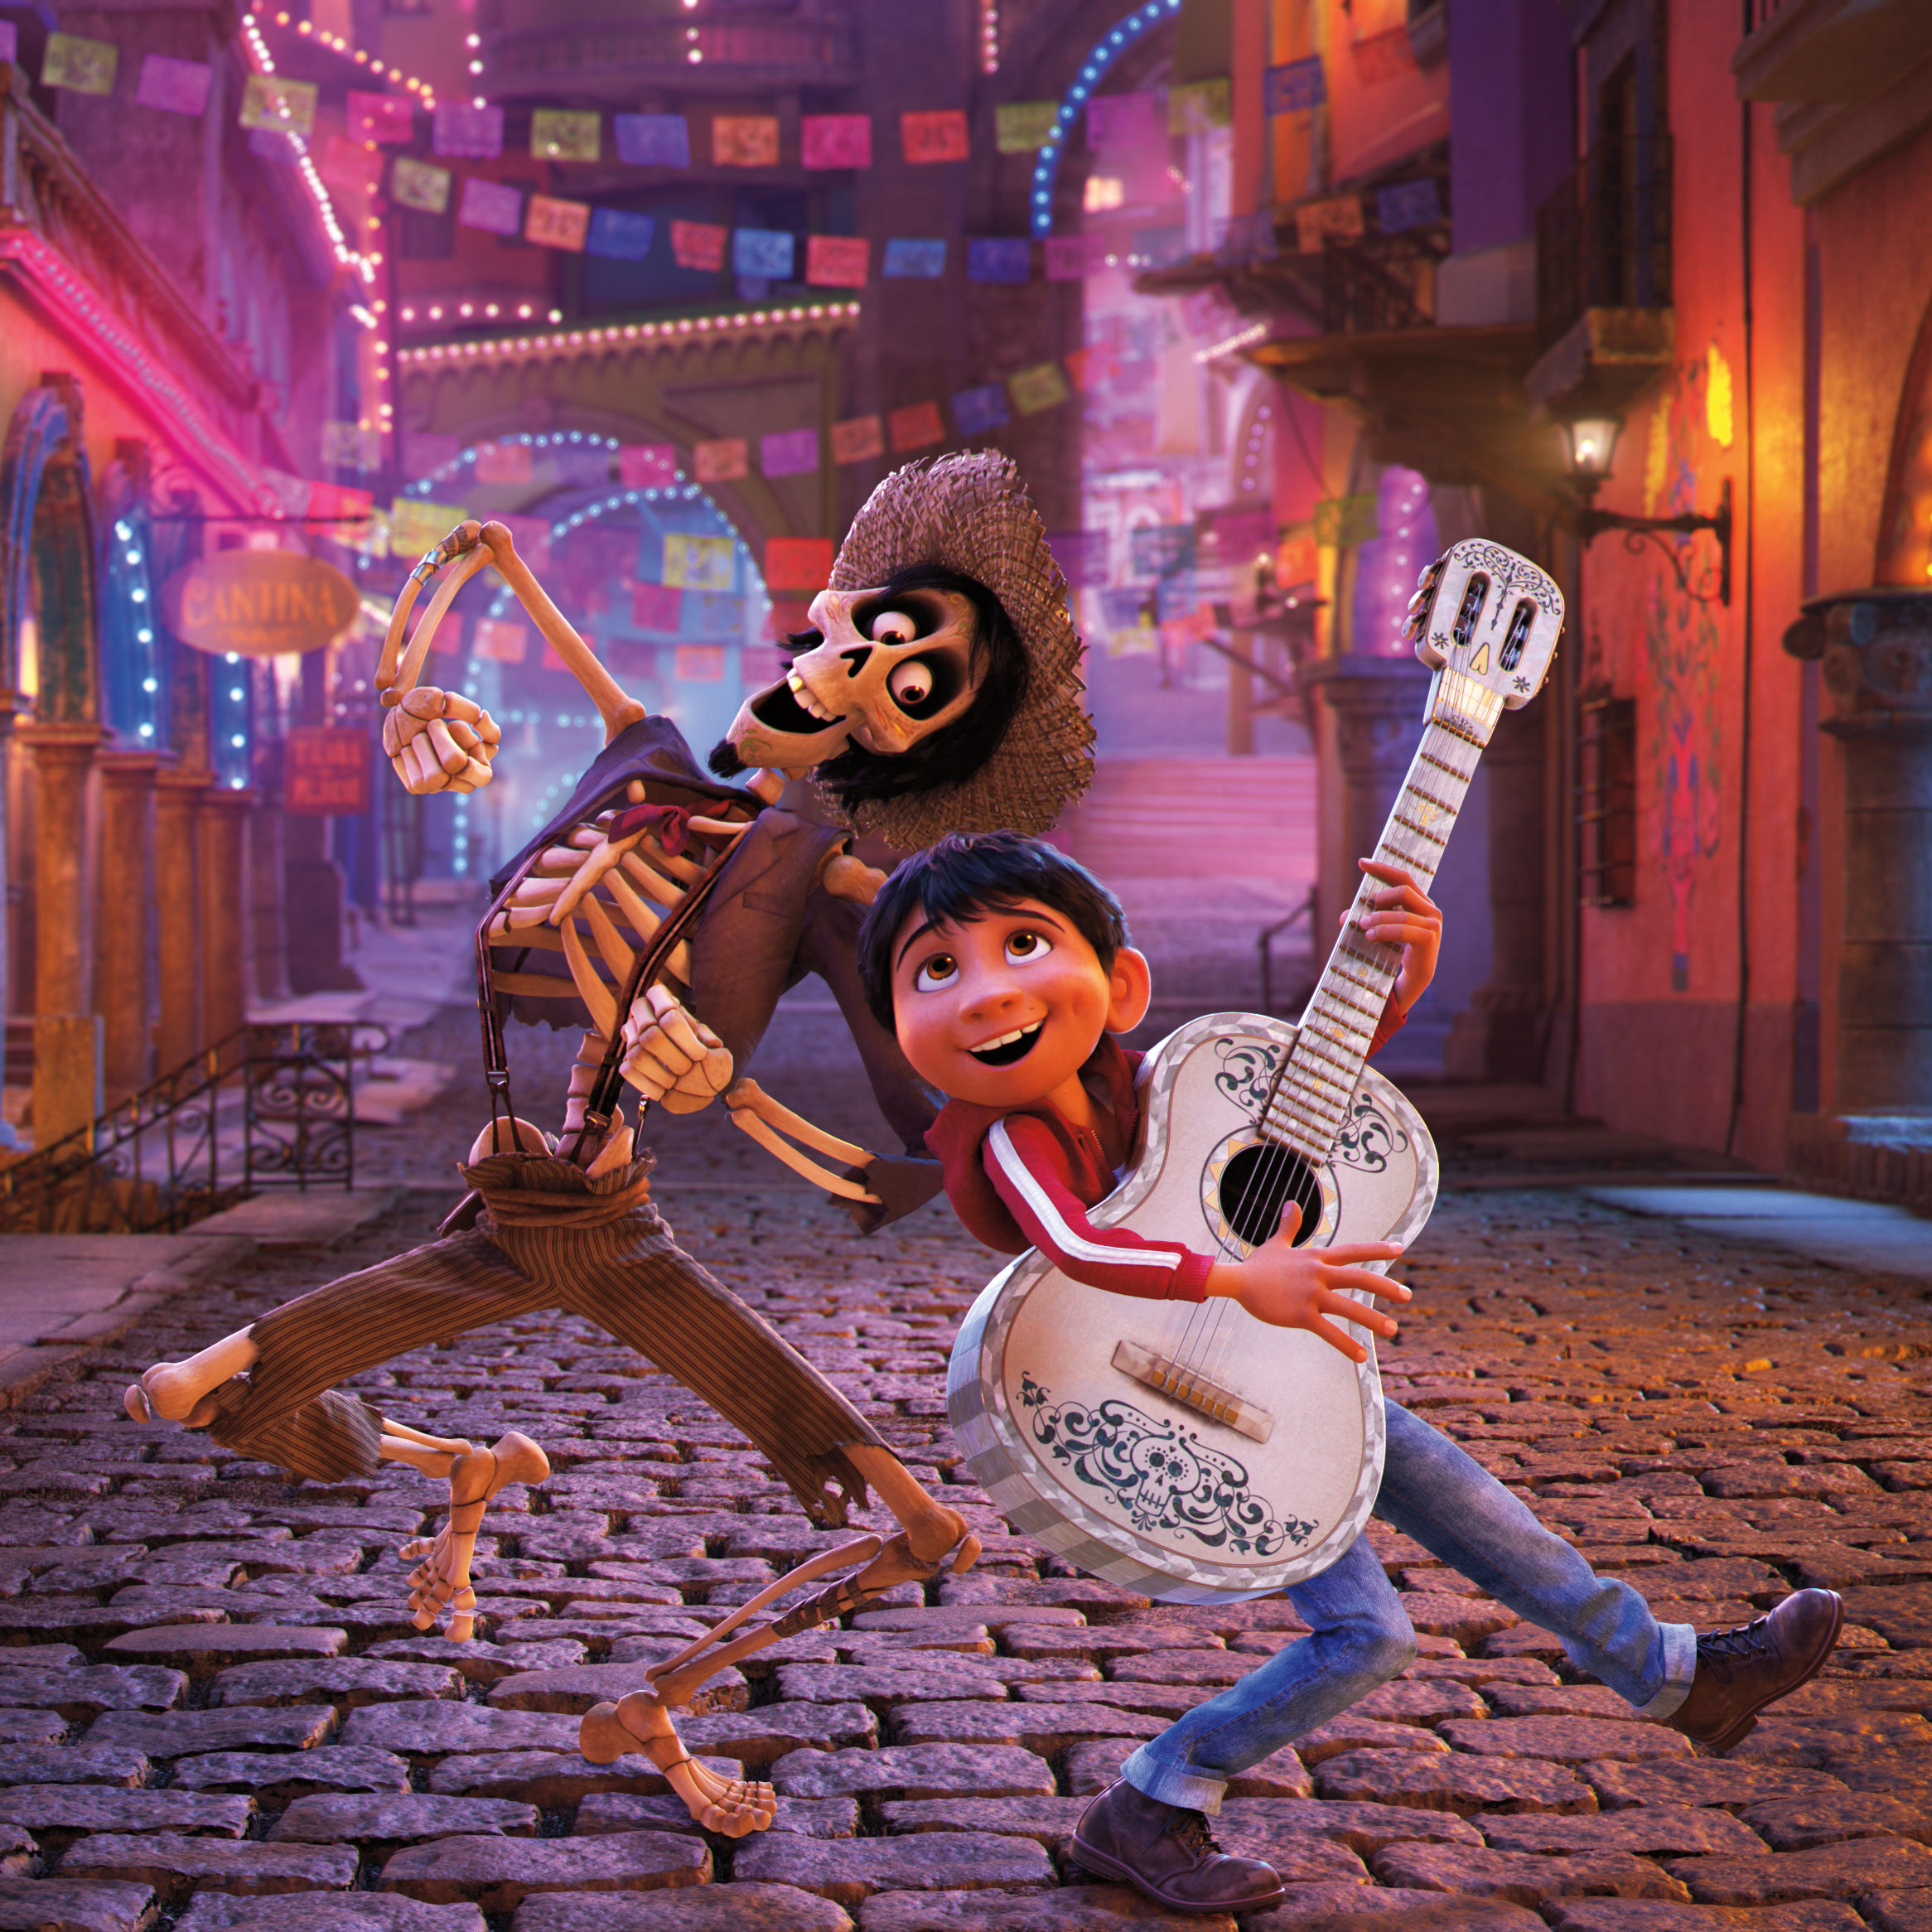 Miguel from Coco playing guitar